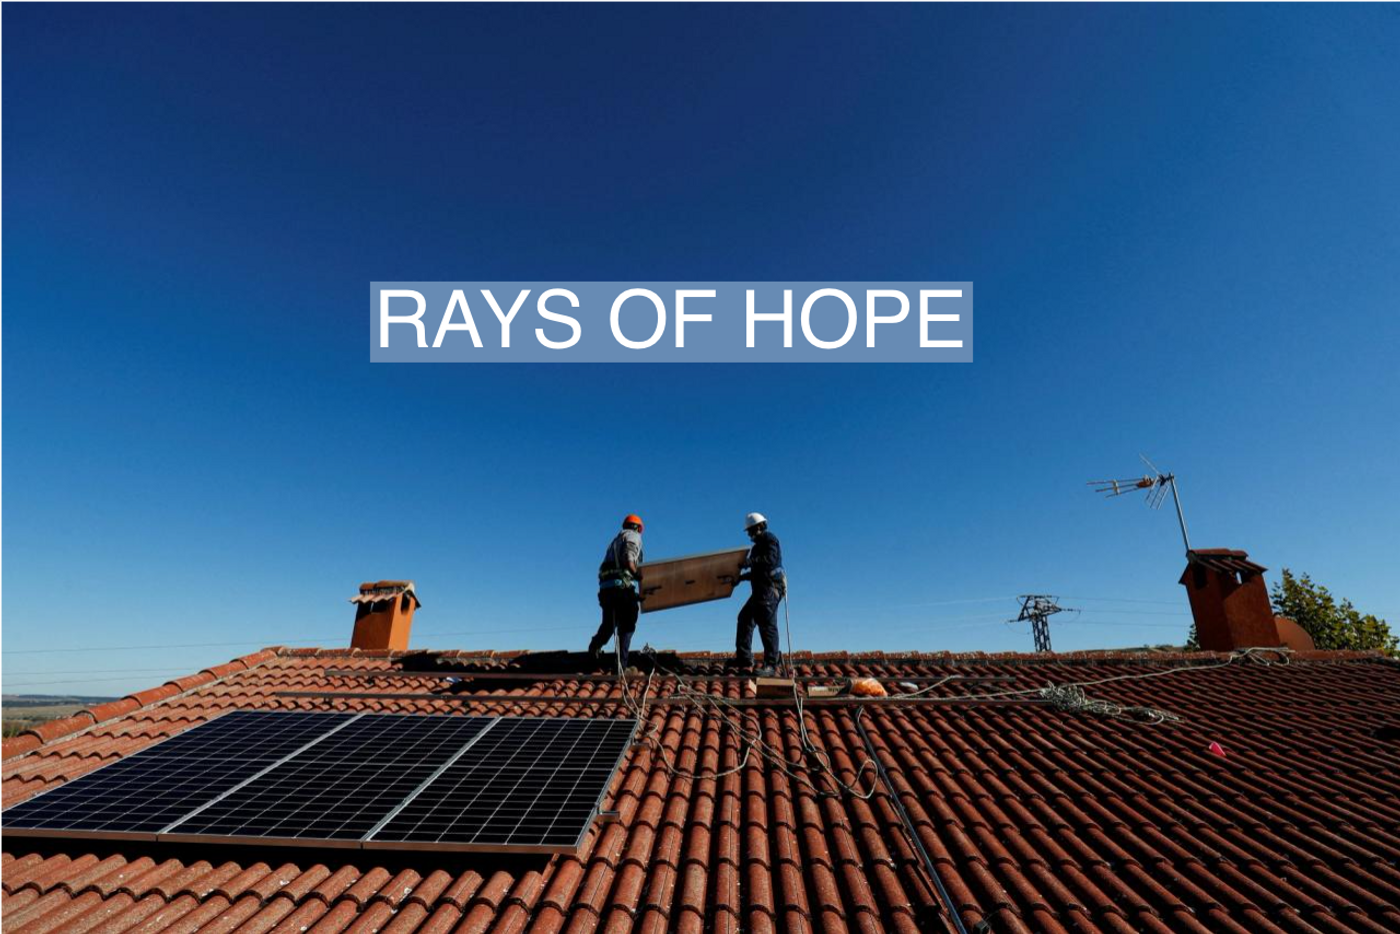 Alexis Ventura and Nelson Barrios carry out a solar panel installation by Norwegian company Otovo in Algete, outside Madrid, Spain, November 16, 2021. Picture taken November 16, 2021. REUTERS/Susana Vera//File Photo